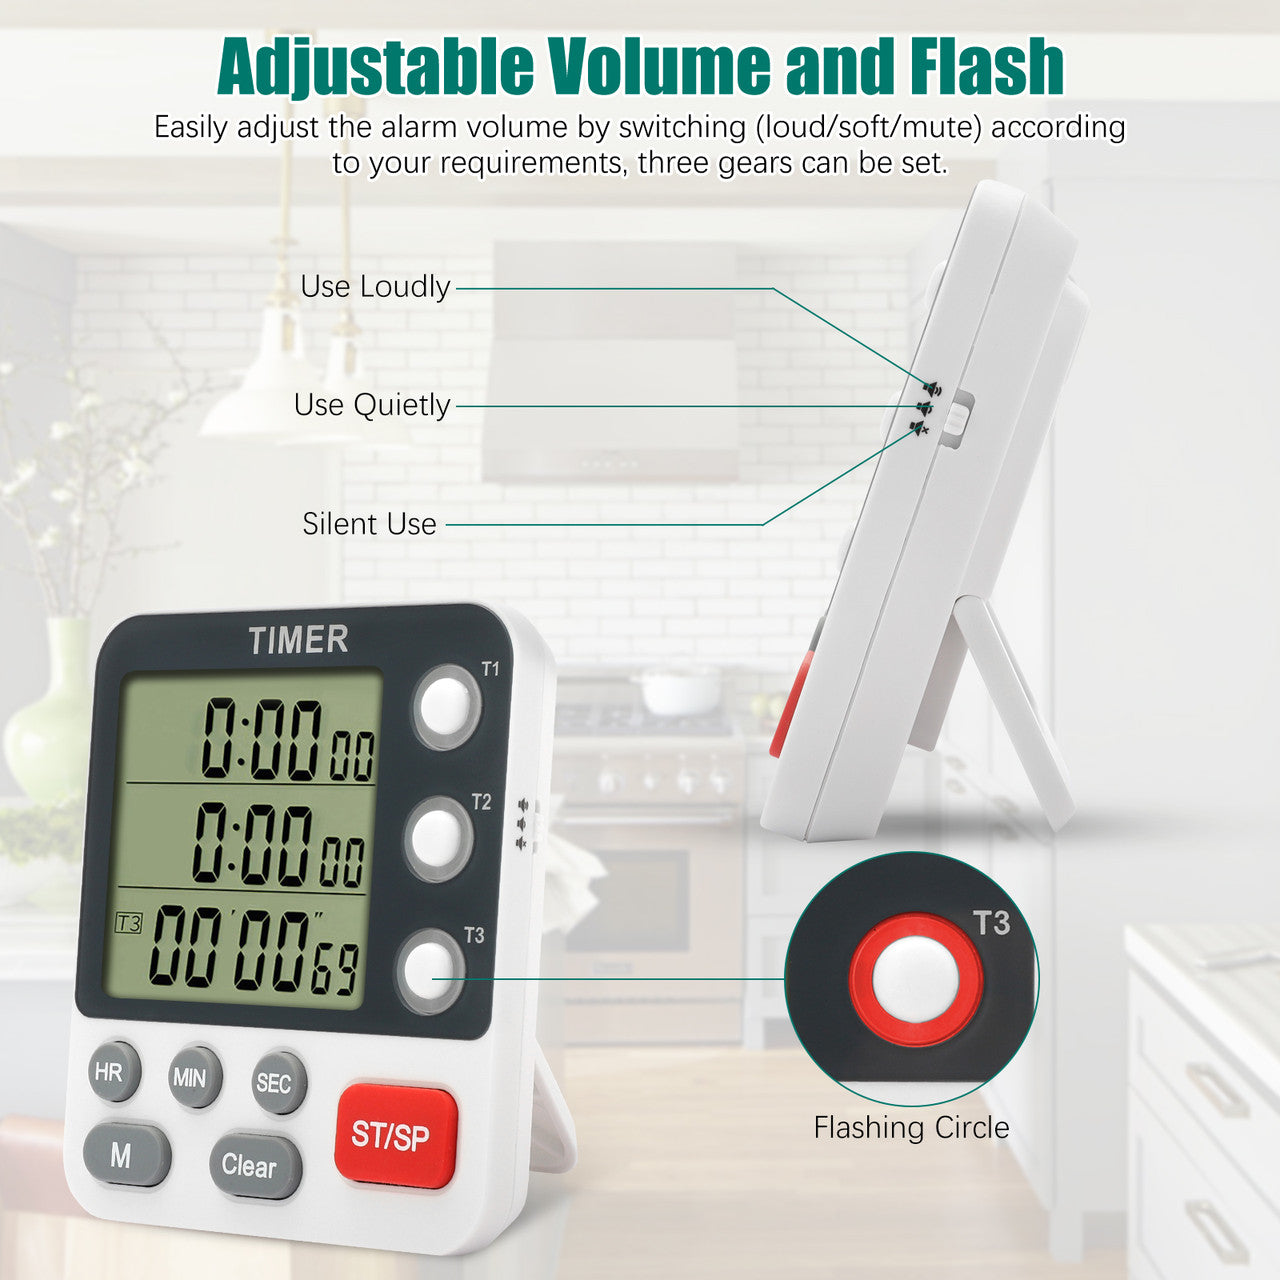 Digital Dual Kitchen Timer - Three Channel Kitchen Timer,Large Display, Loud Volume Alarm and Flashing Light with Magnetic Back (White)